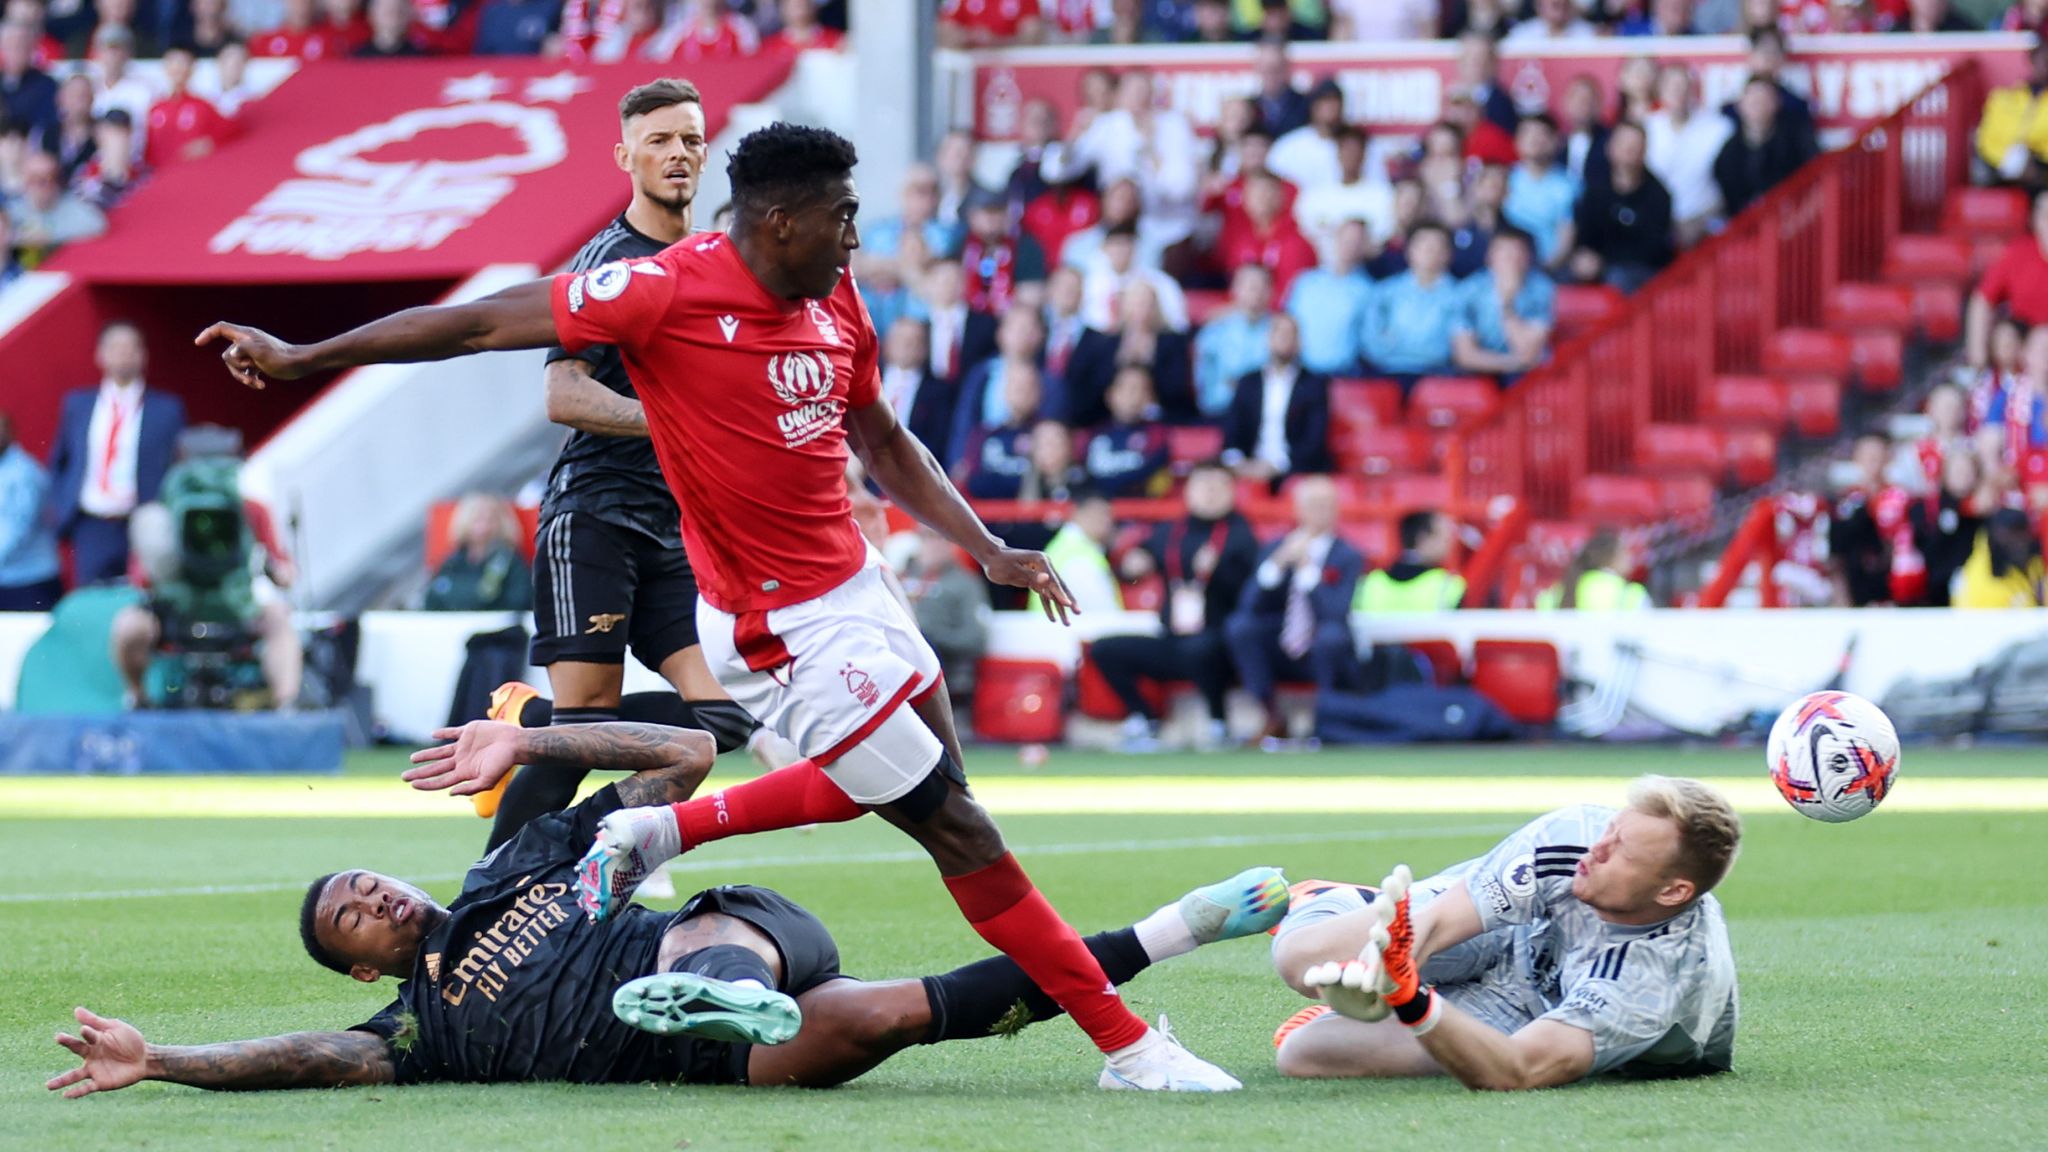 Nottingham Forest beat Arsenal to stay up and hand Man City the title